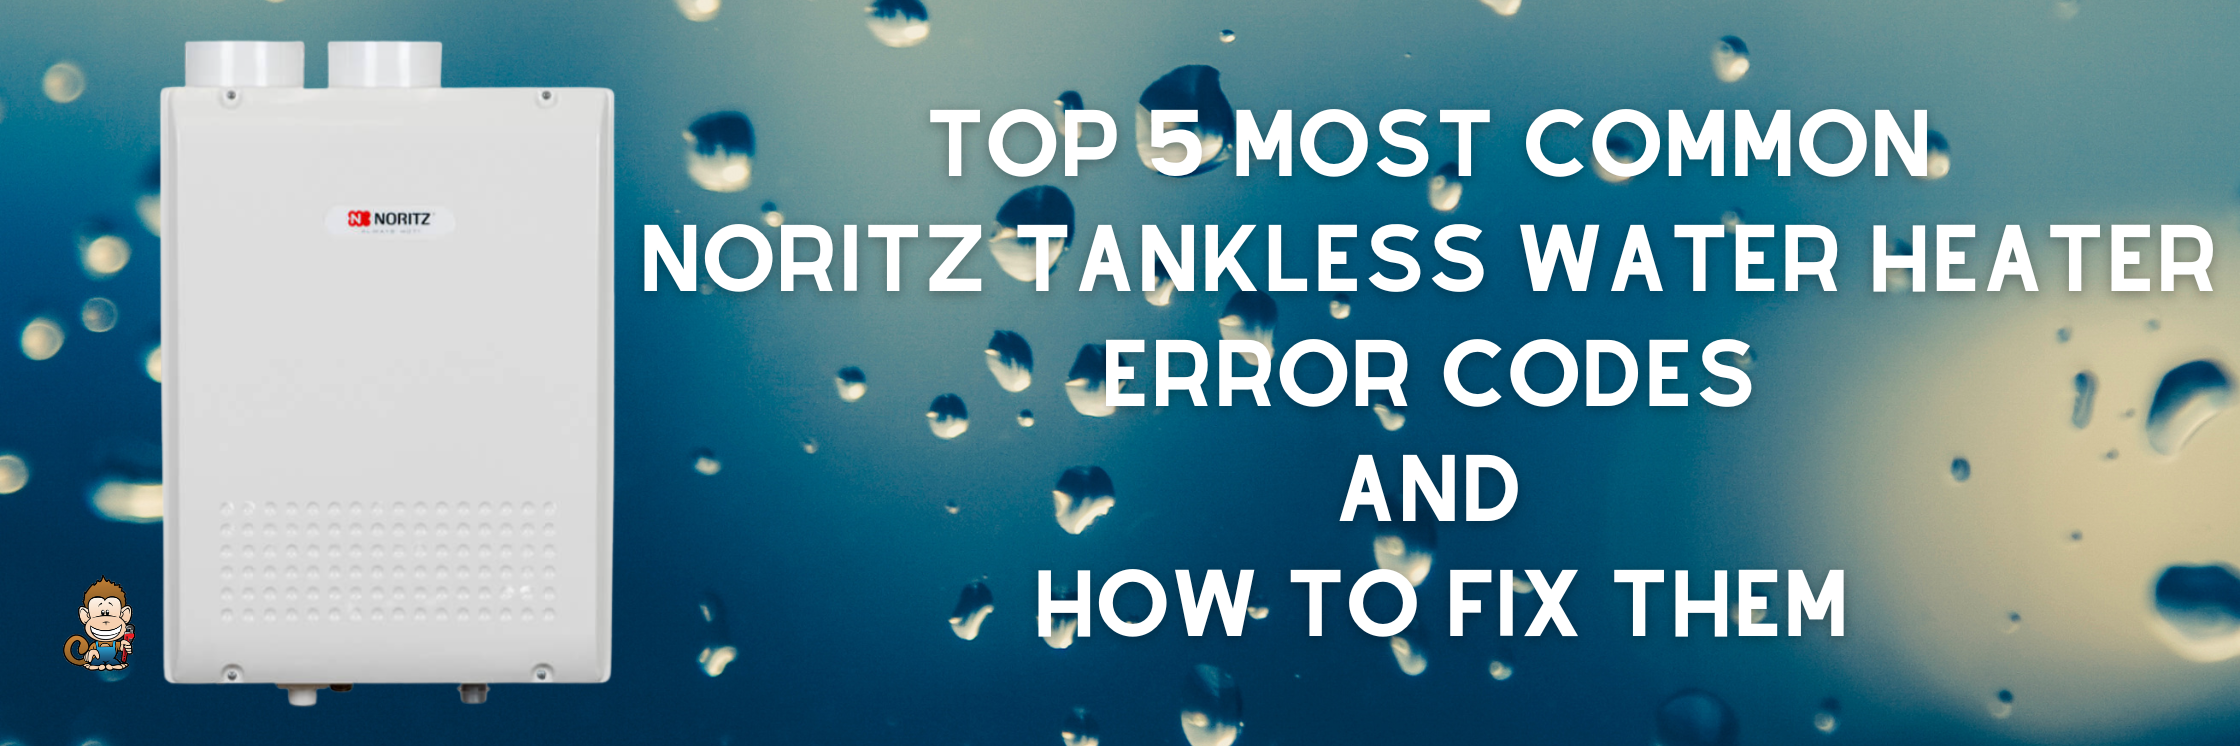 Top 5 Most Common Noritz Tankless Water Heater Error Codes and How to Fix Them